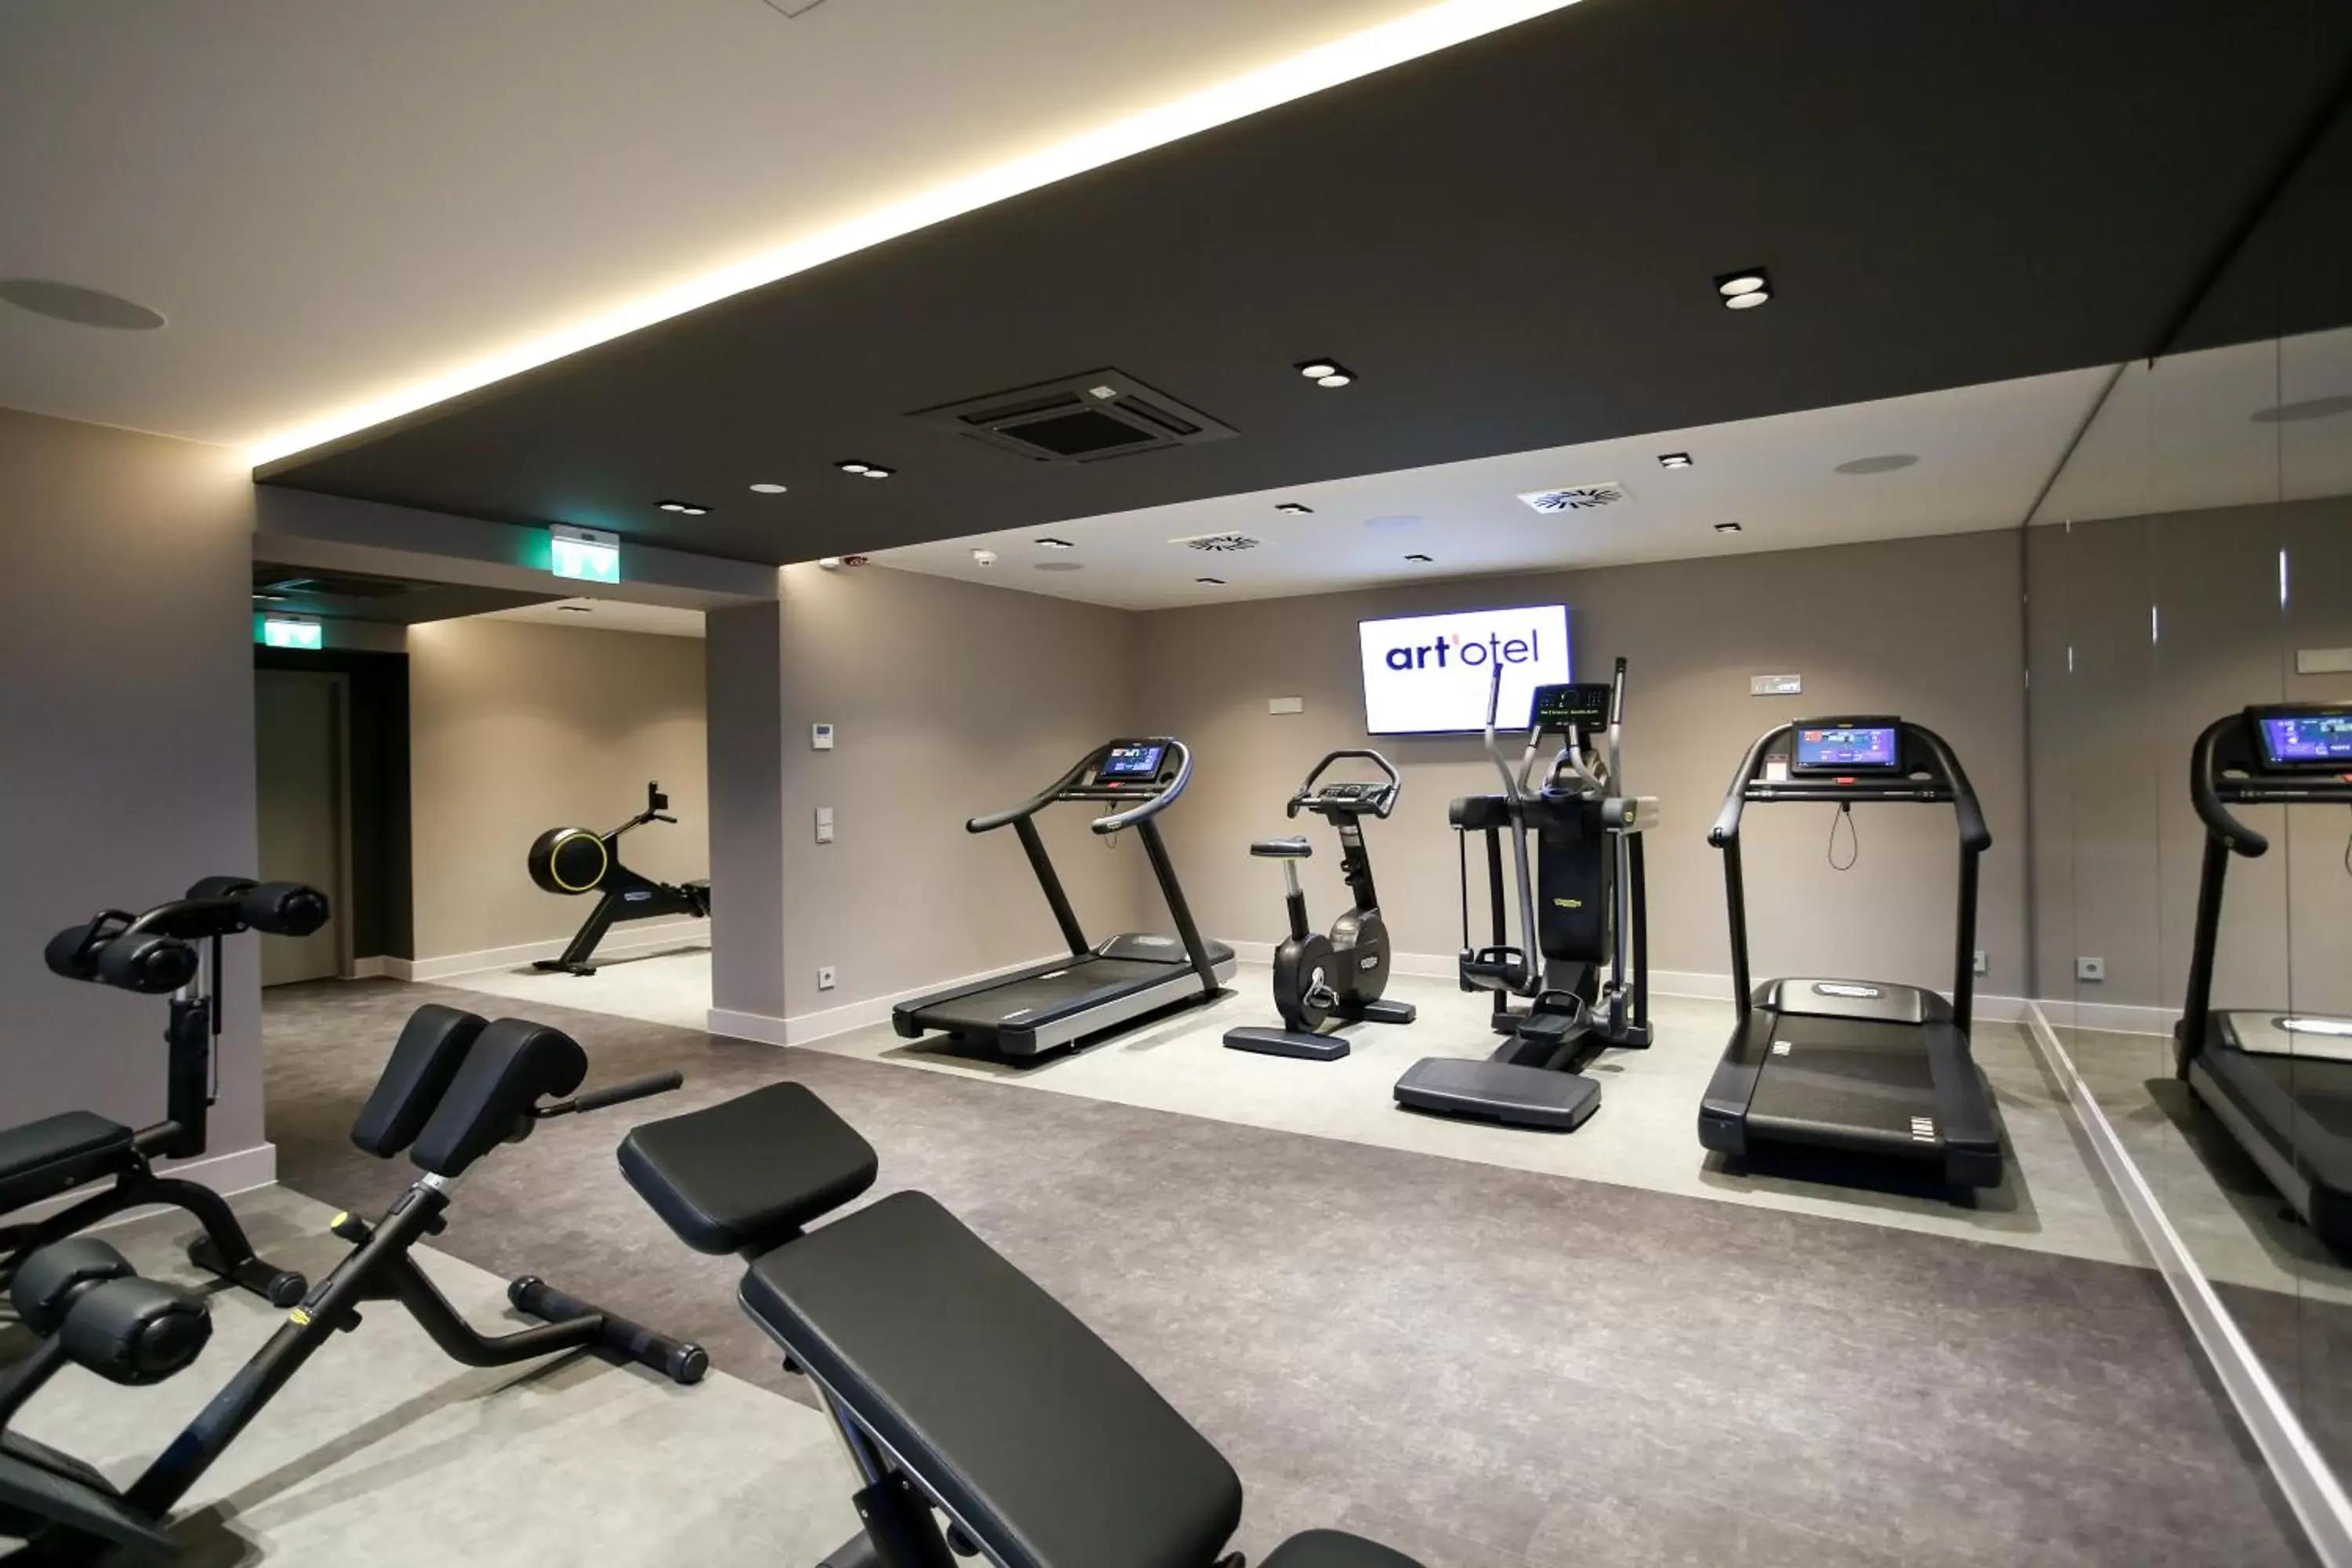 Fitness centre/facilities, Fitness Center/Facilities in art'otel berlin mitte, Powered by Radisson Hotels